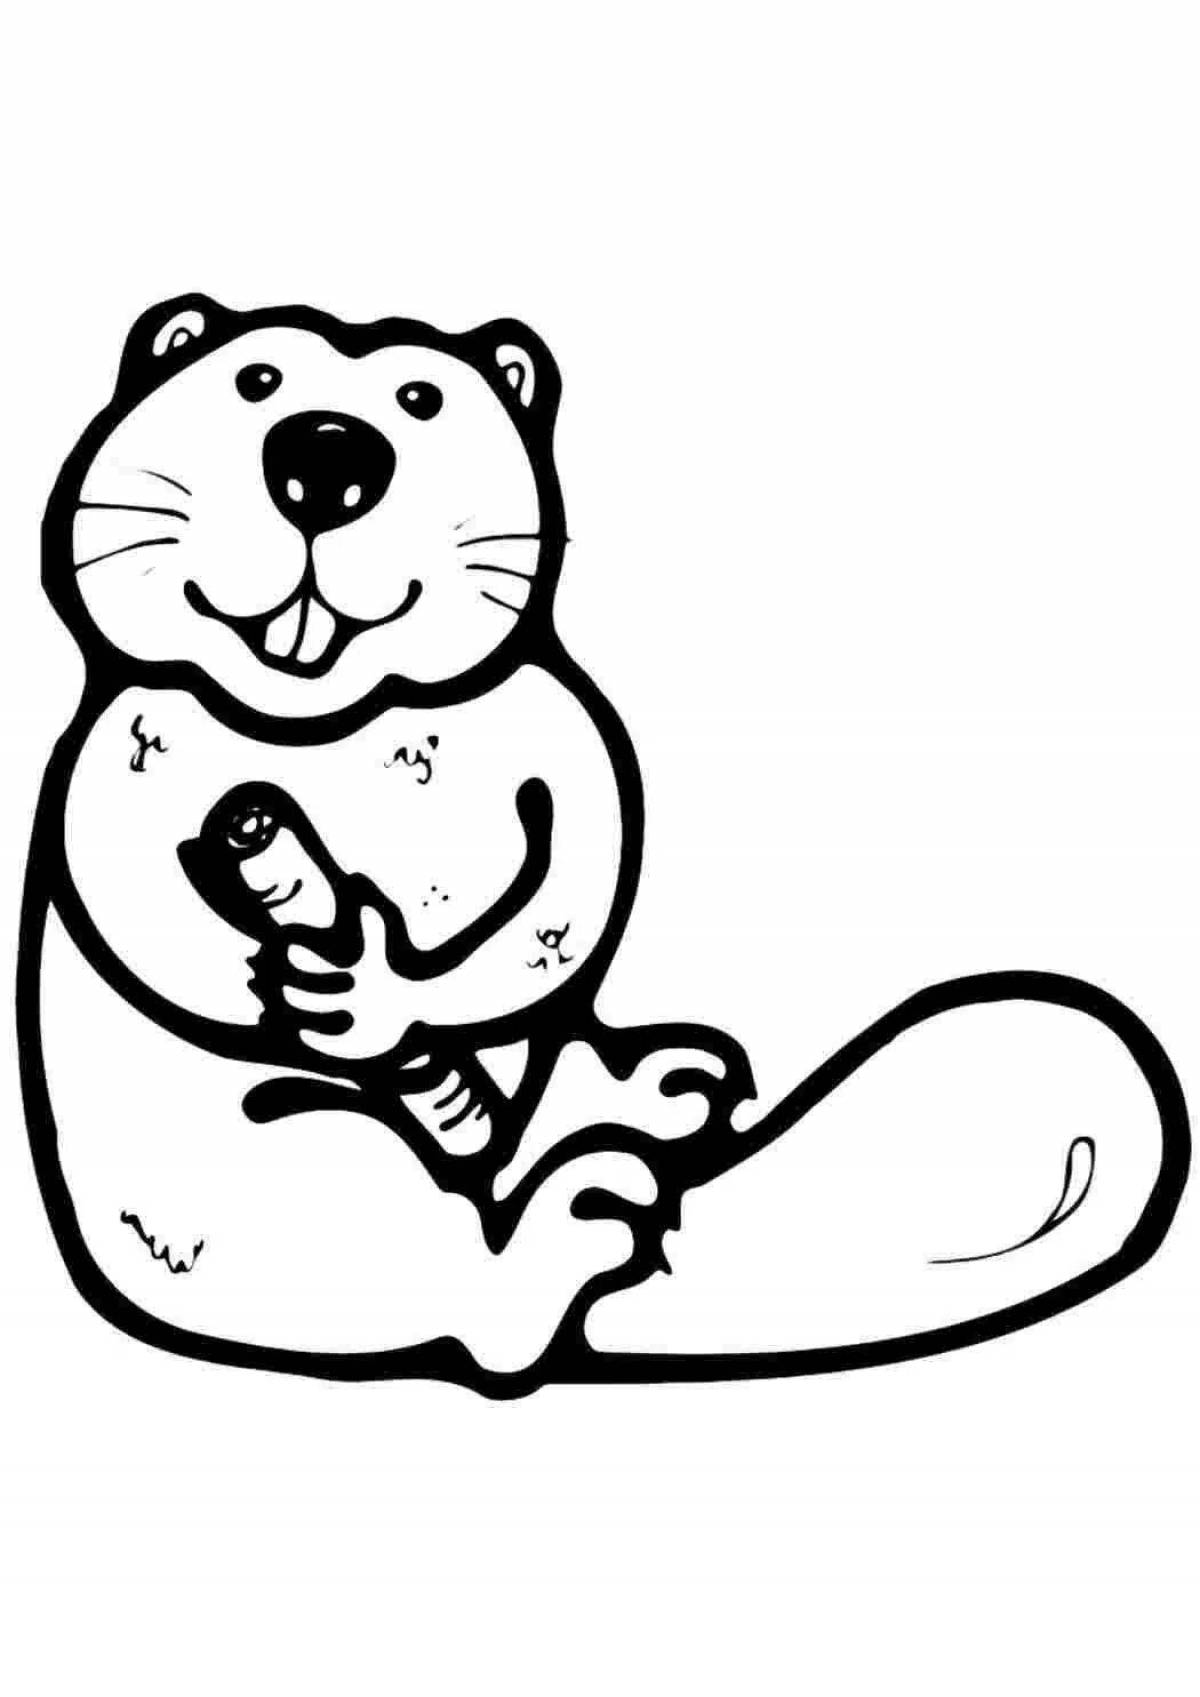 Glorious beaver coloring book for kids